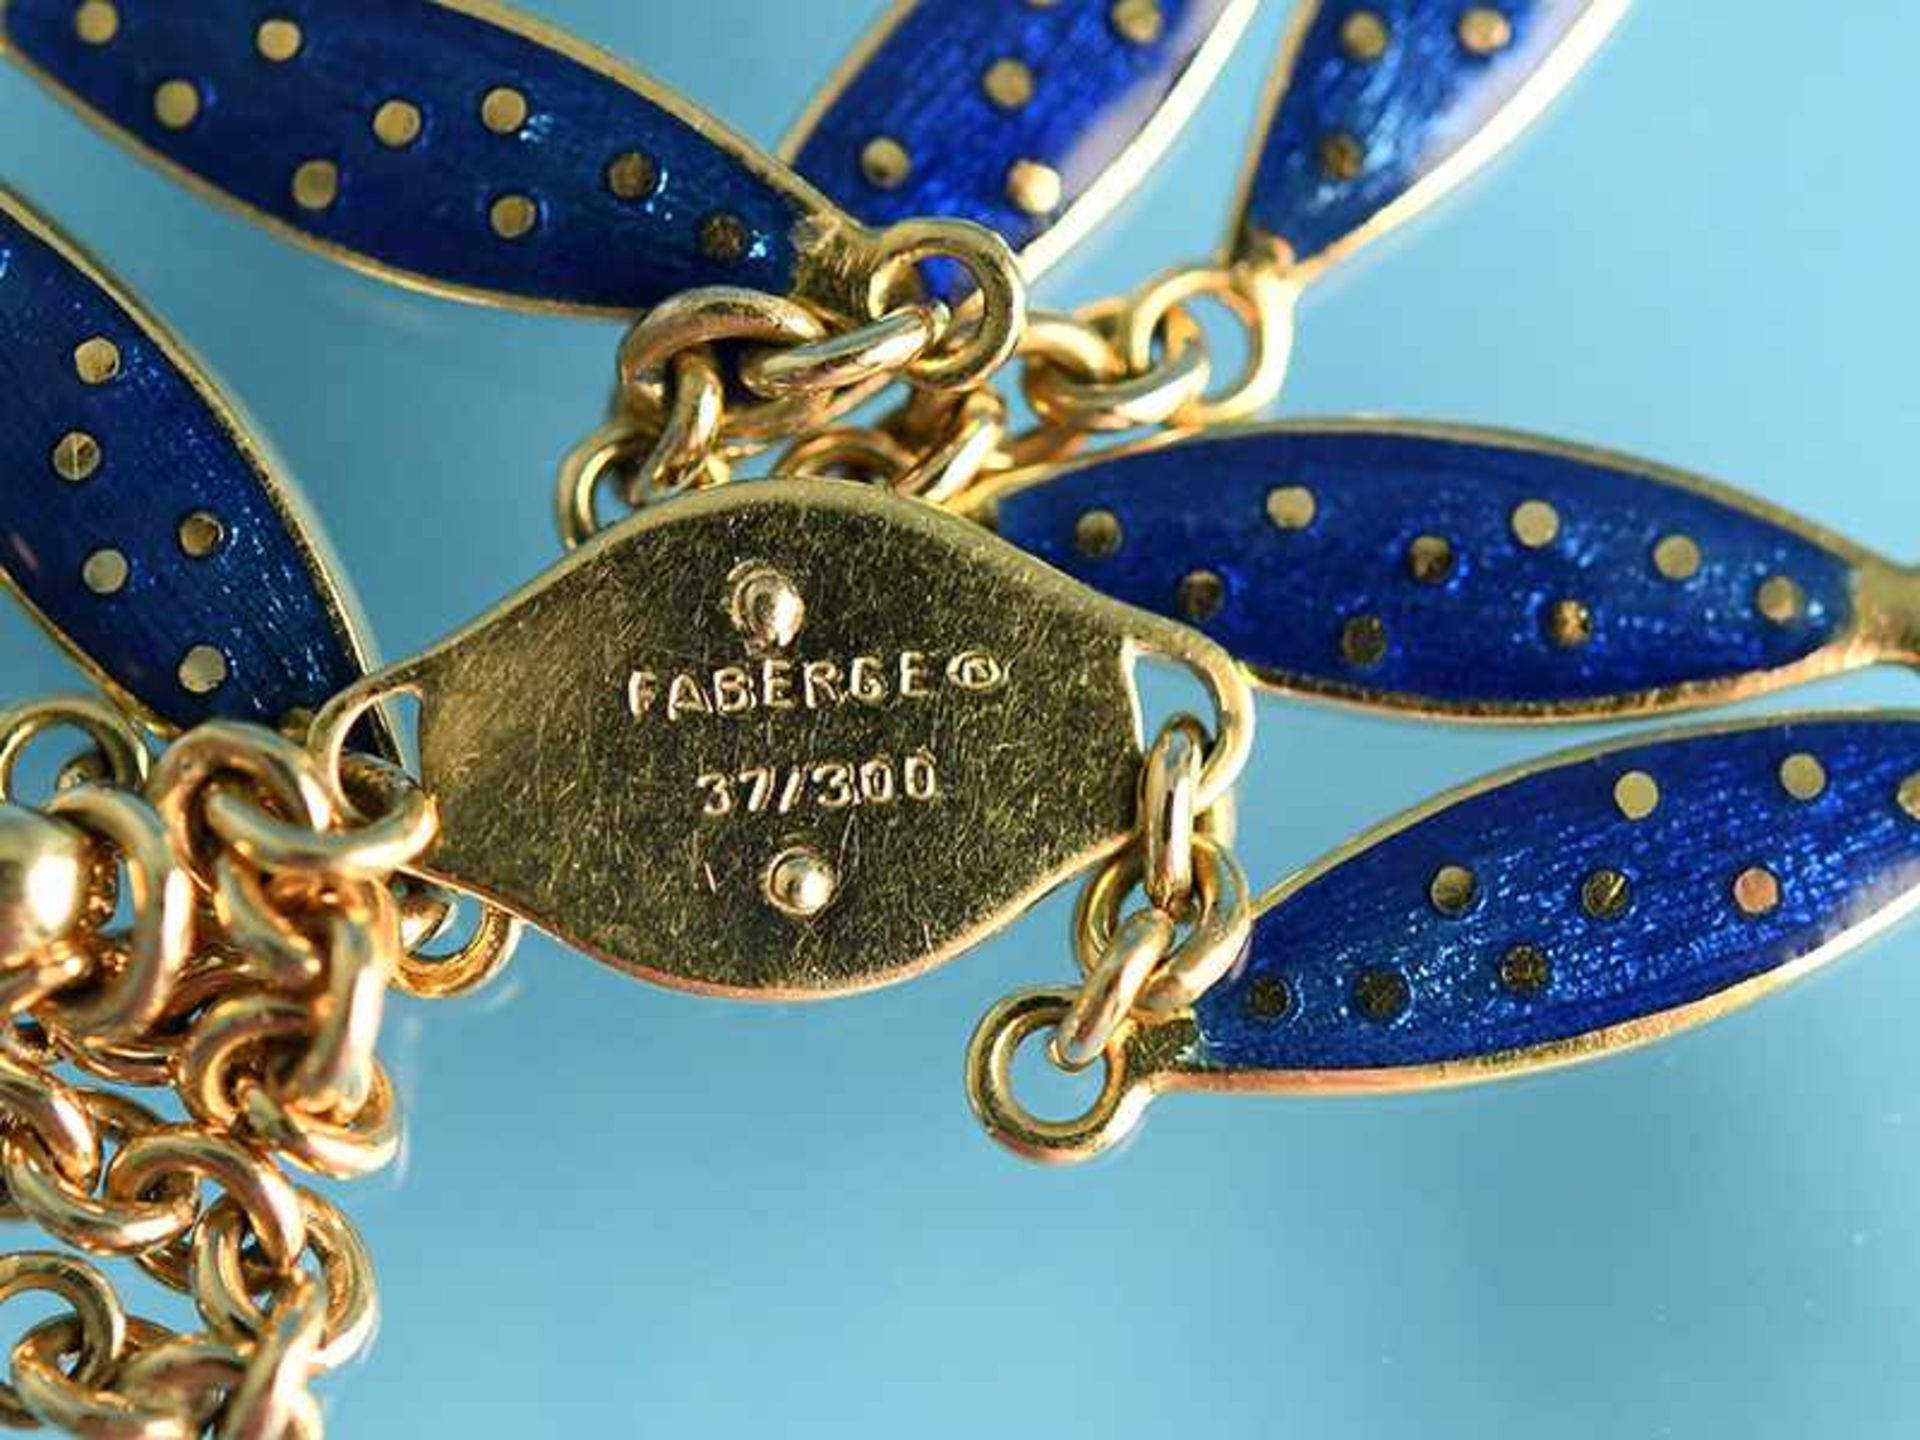 Collier mit Emaille, Collection Fabergé by Victor Mayer, No. 37/ 300, Pforzheim, 20. Jh. 750/- - Image 2 of 8